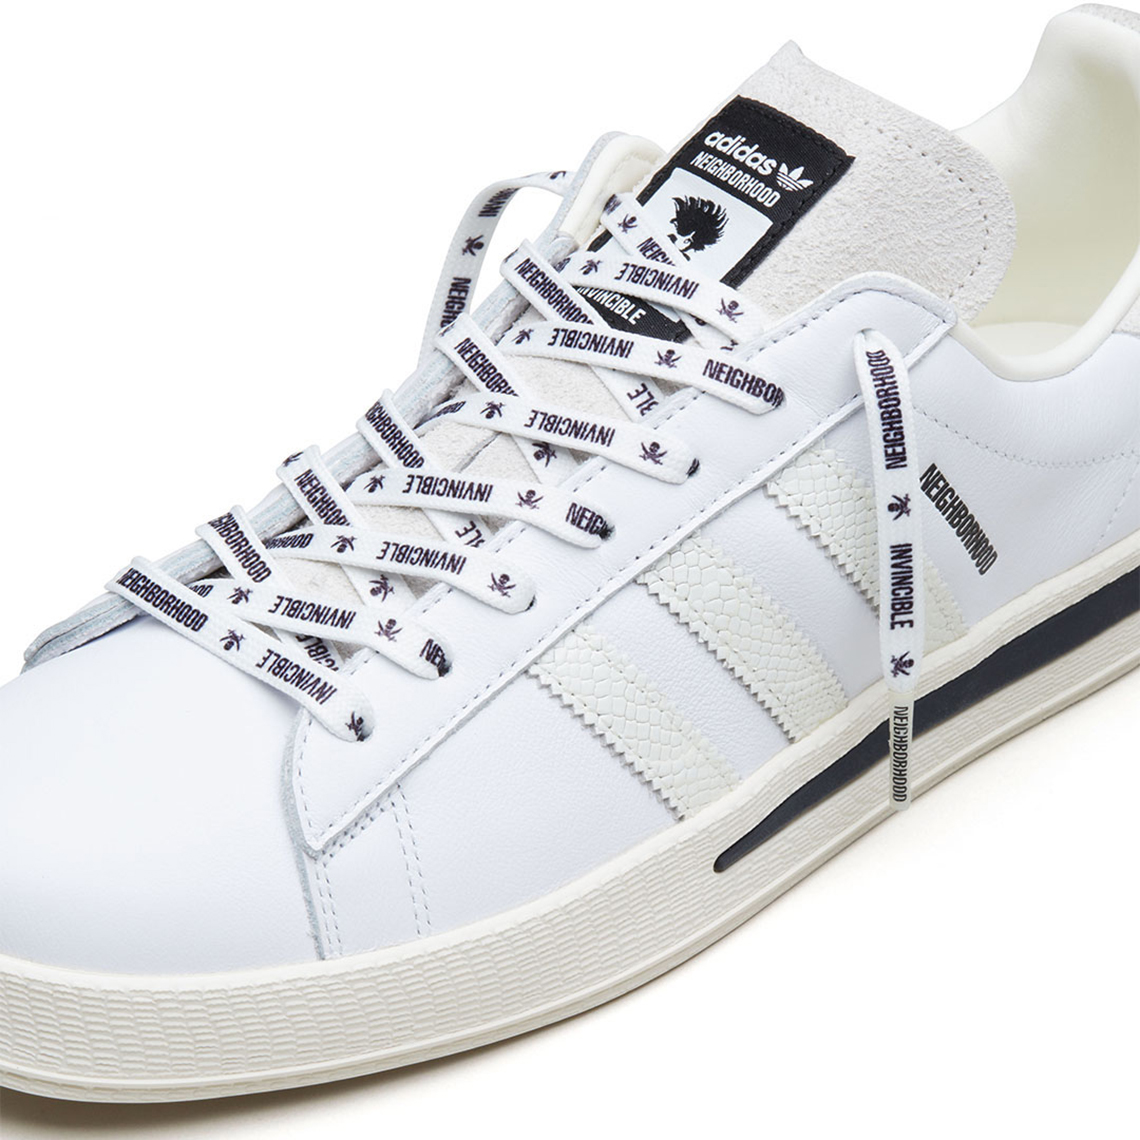 INVINCIBLE NEIGHBORHOOD adidas Campus White Release Date